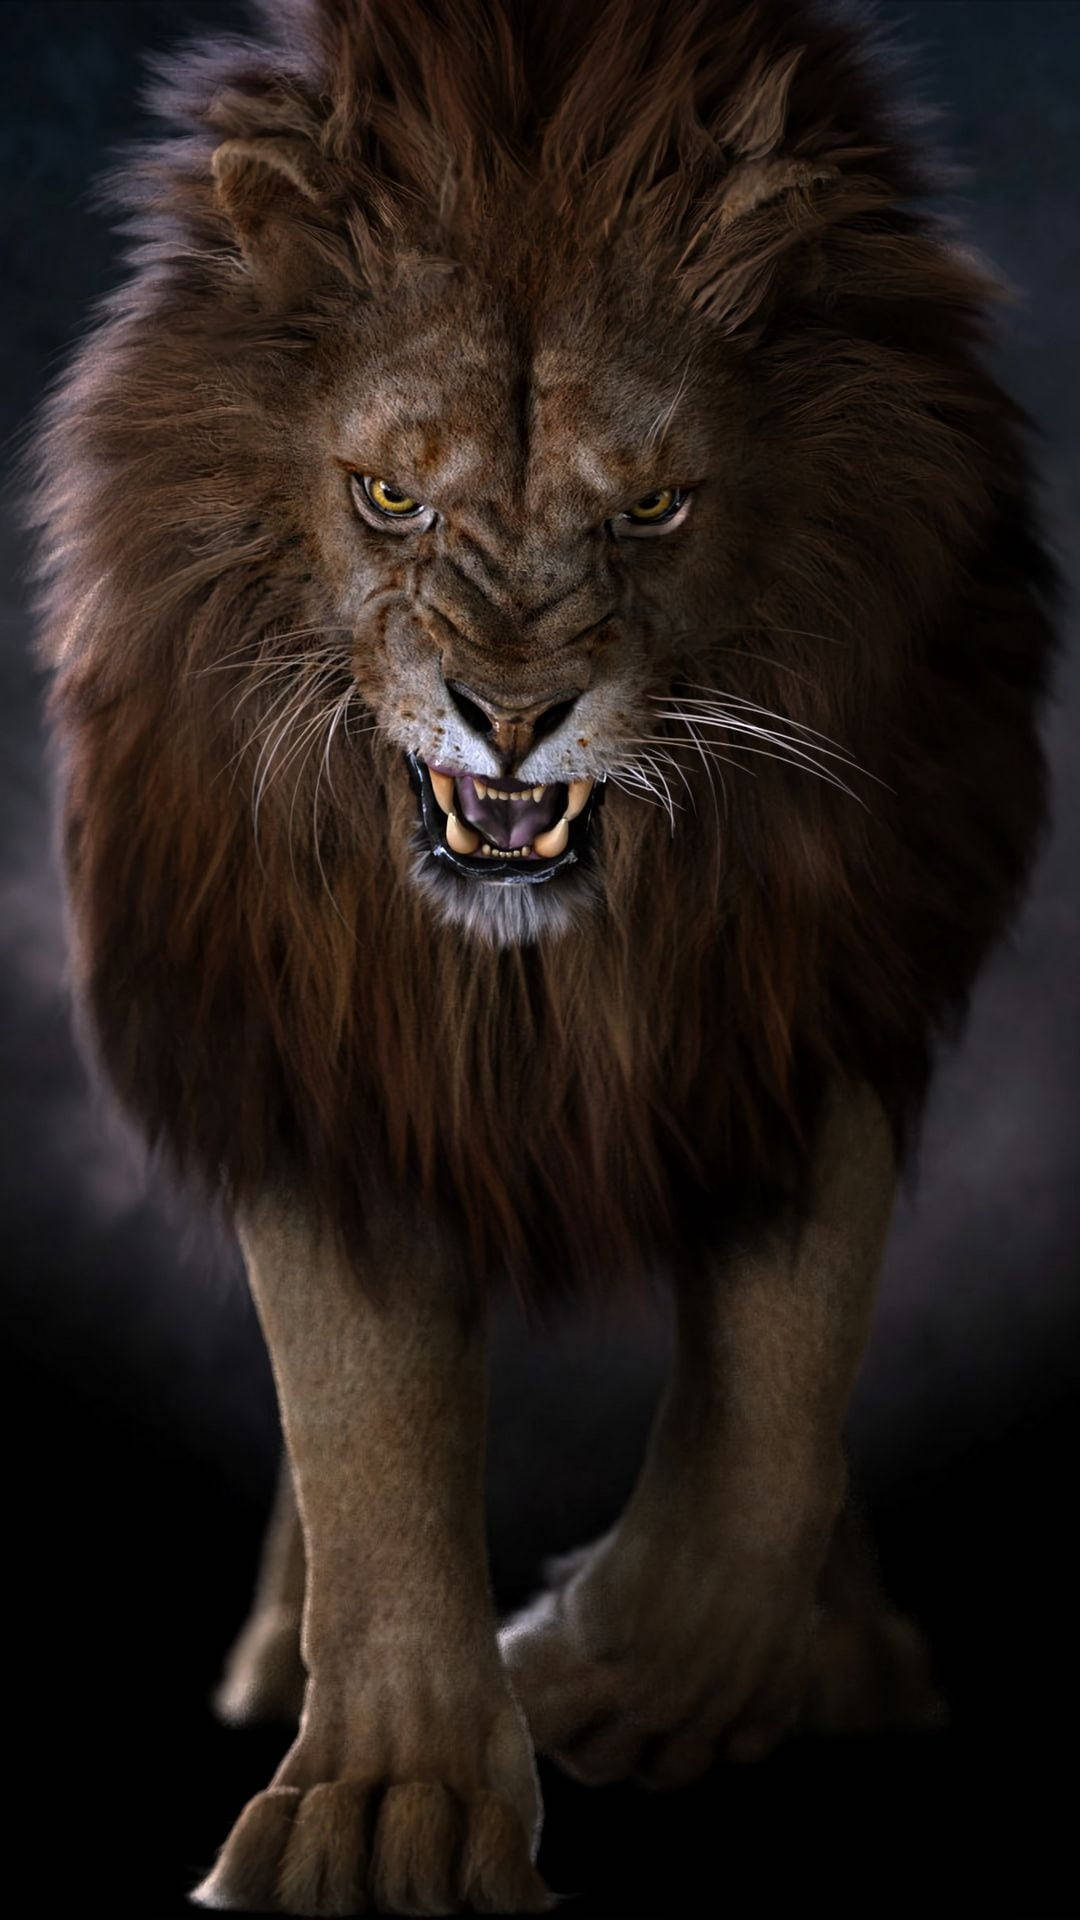 Free Lion Phone Wallpaper Downloads, [100+] Lion Phone Wallpapers for FREE  